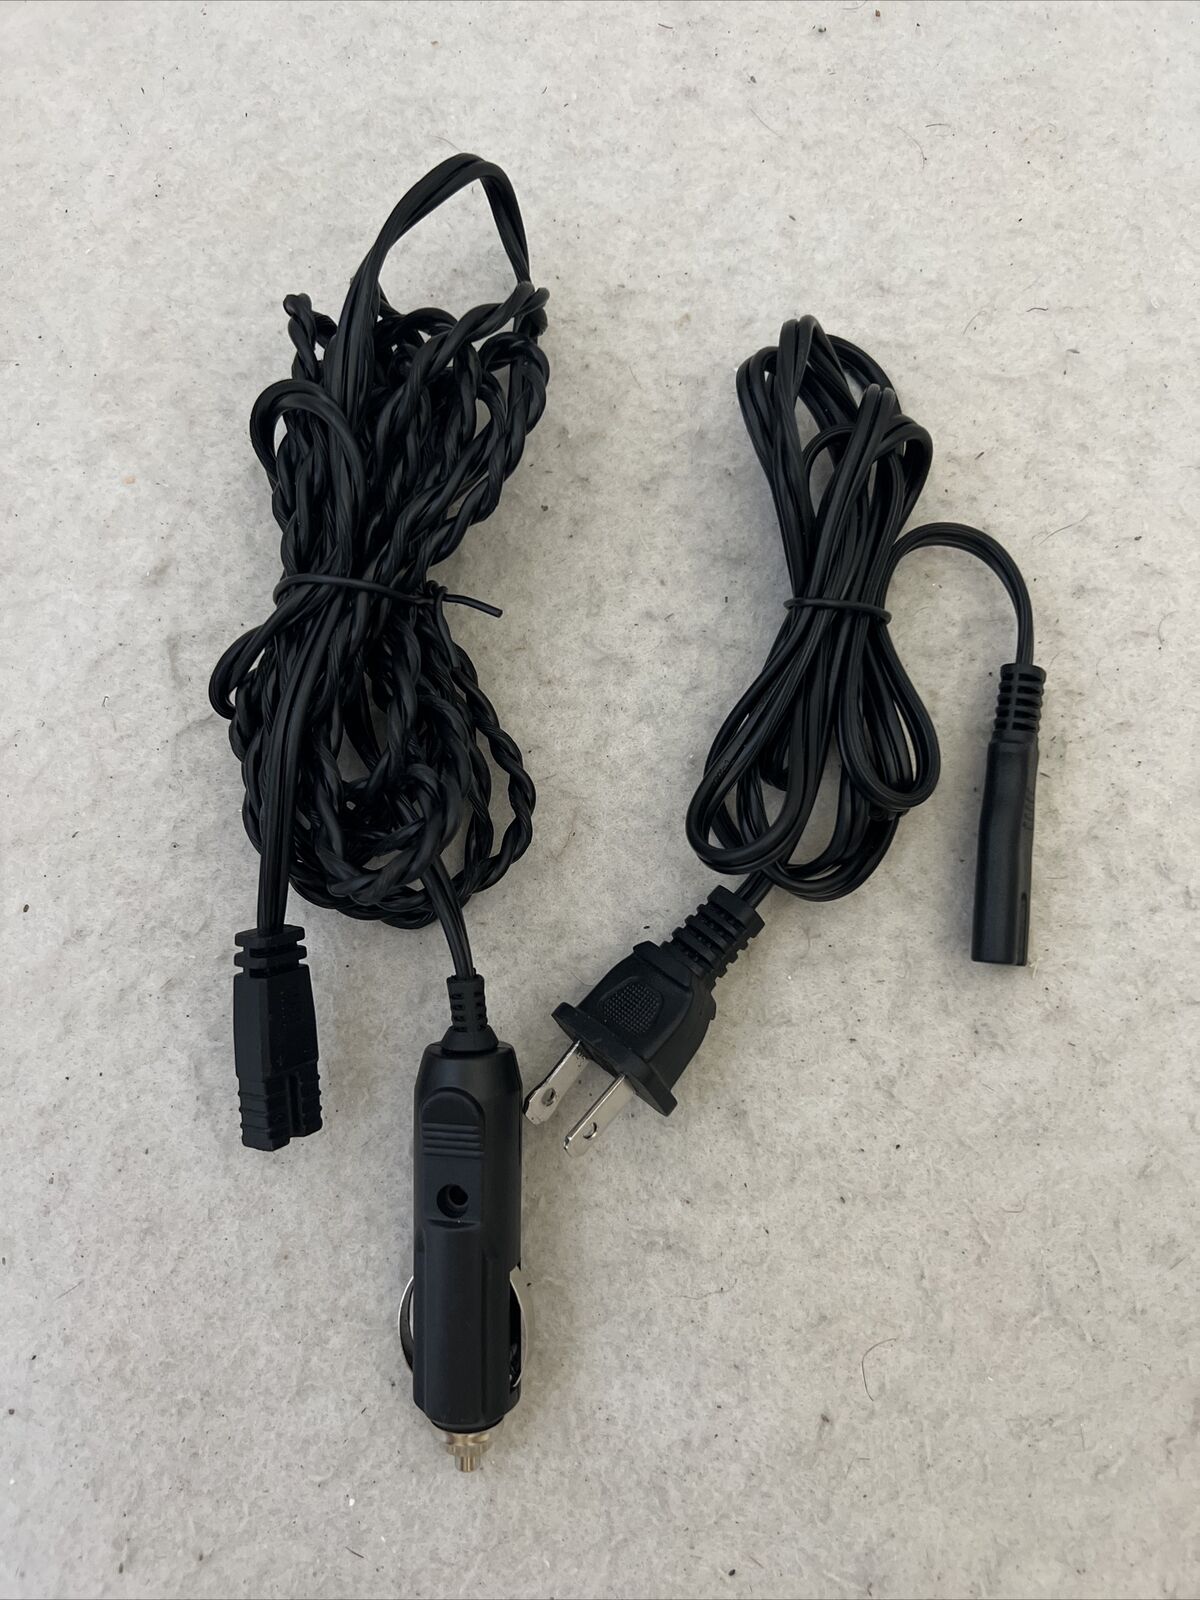 Charger Cord To Cigarette Lighter Connection For Portable Air Tire Pump